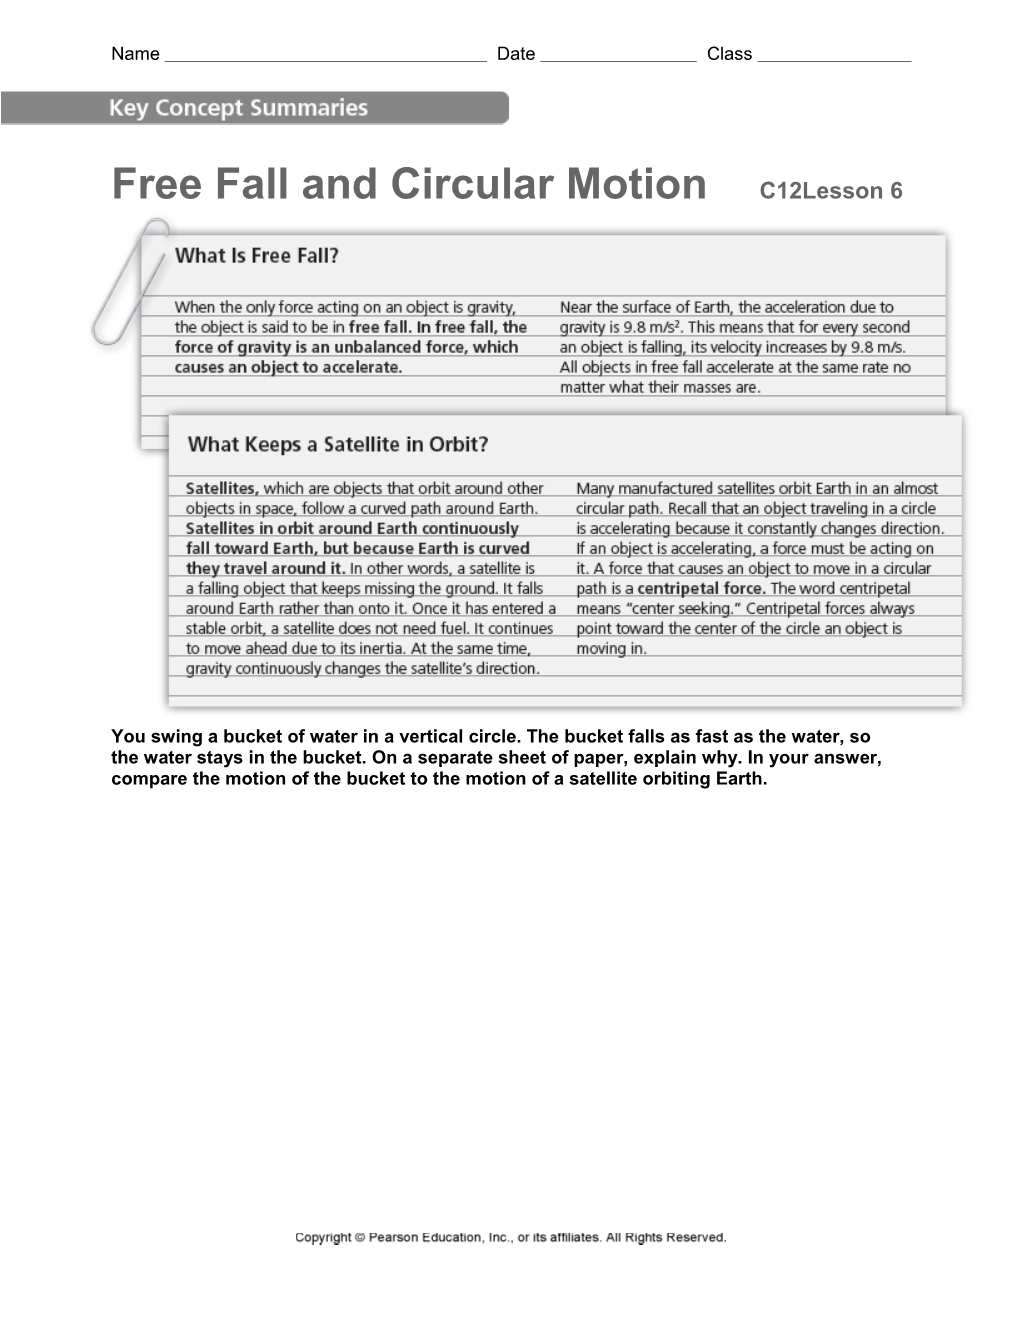 Free Fall and Circular Motion C12lesson 6